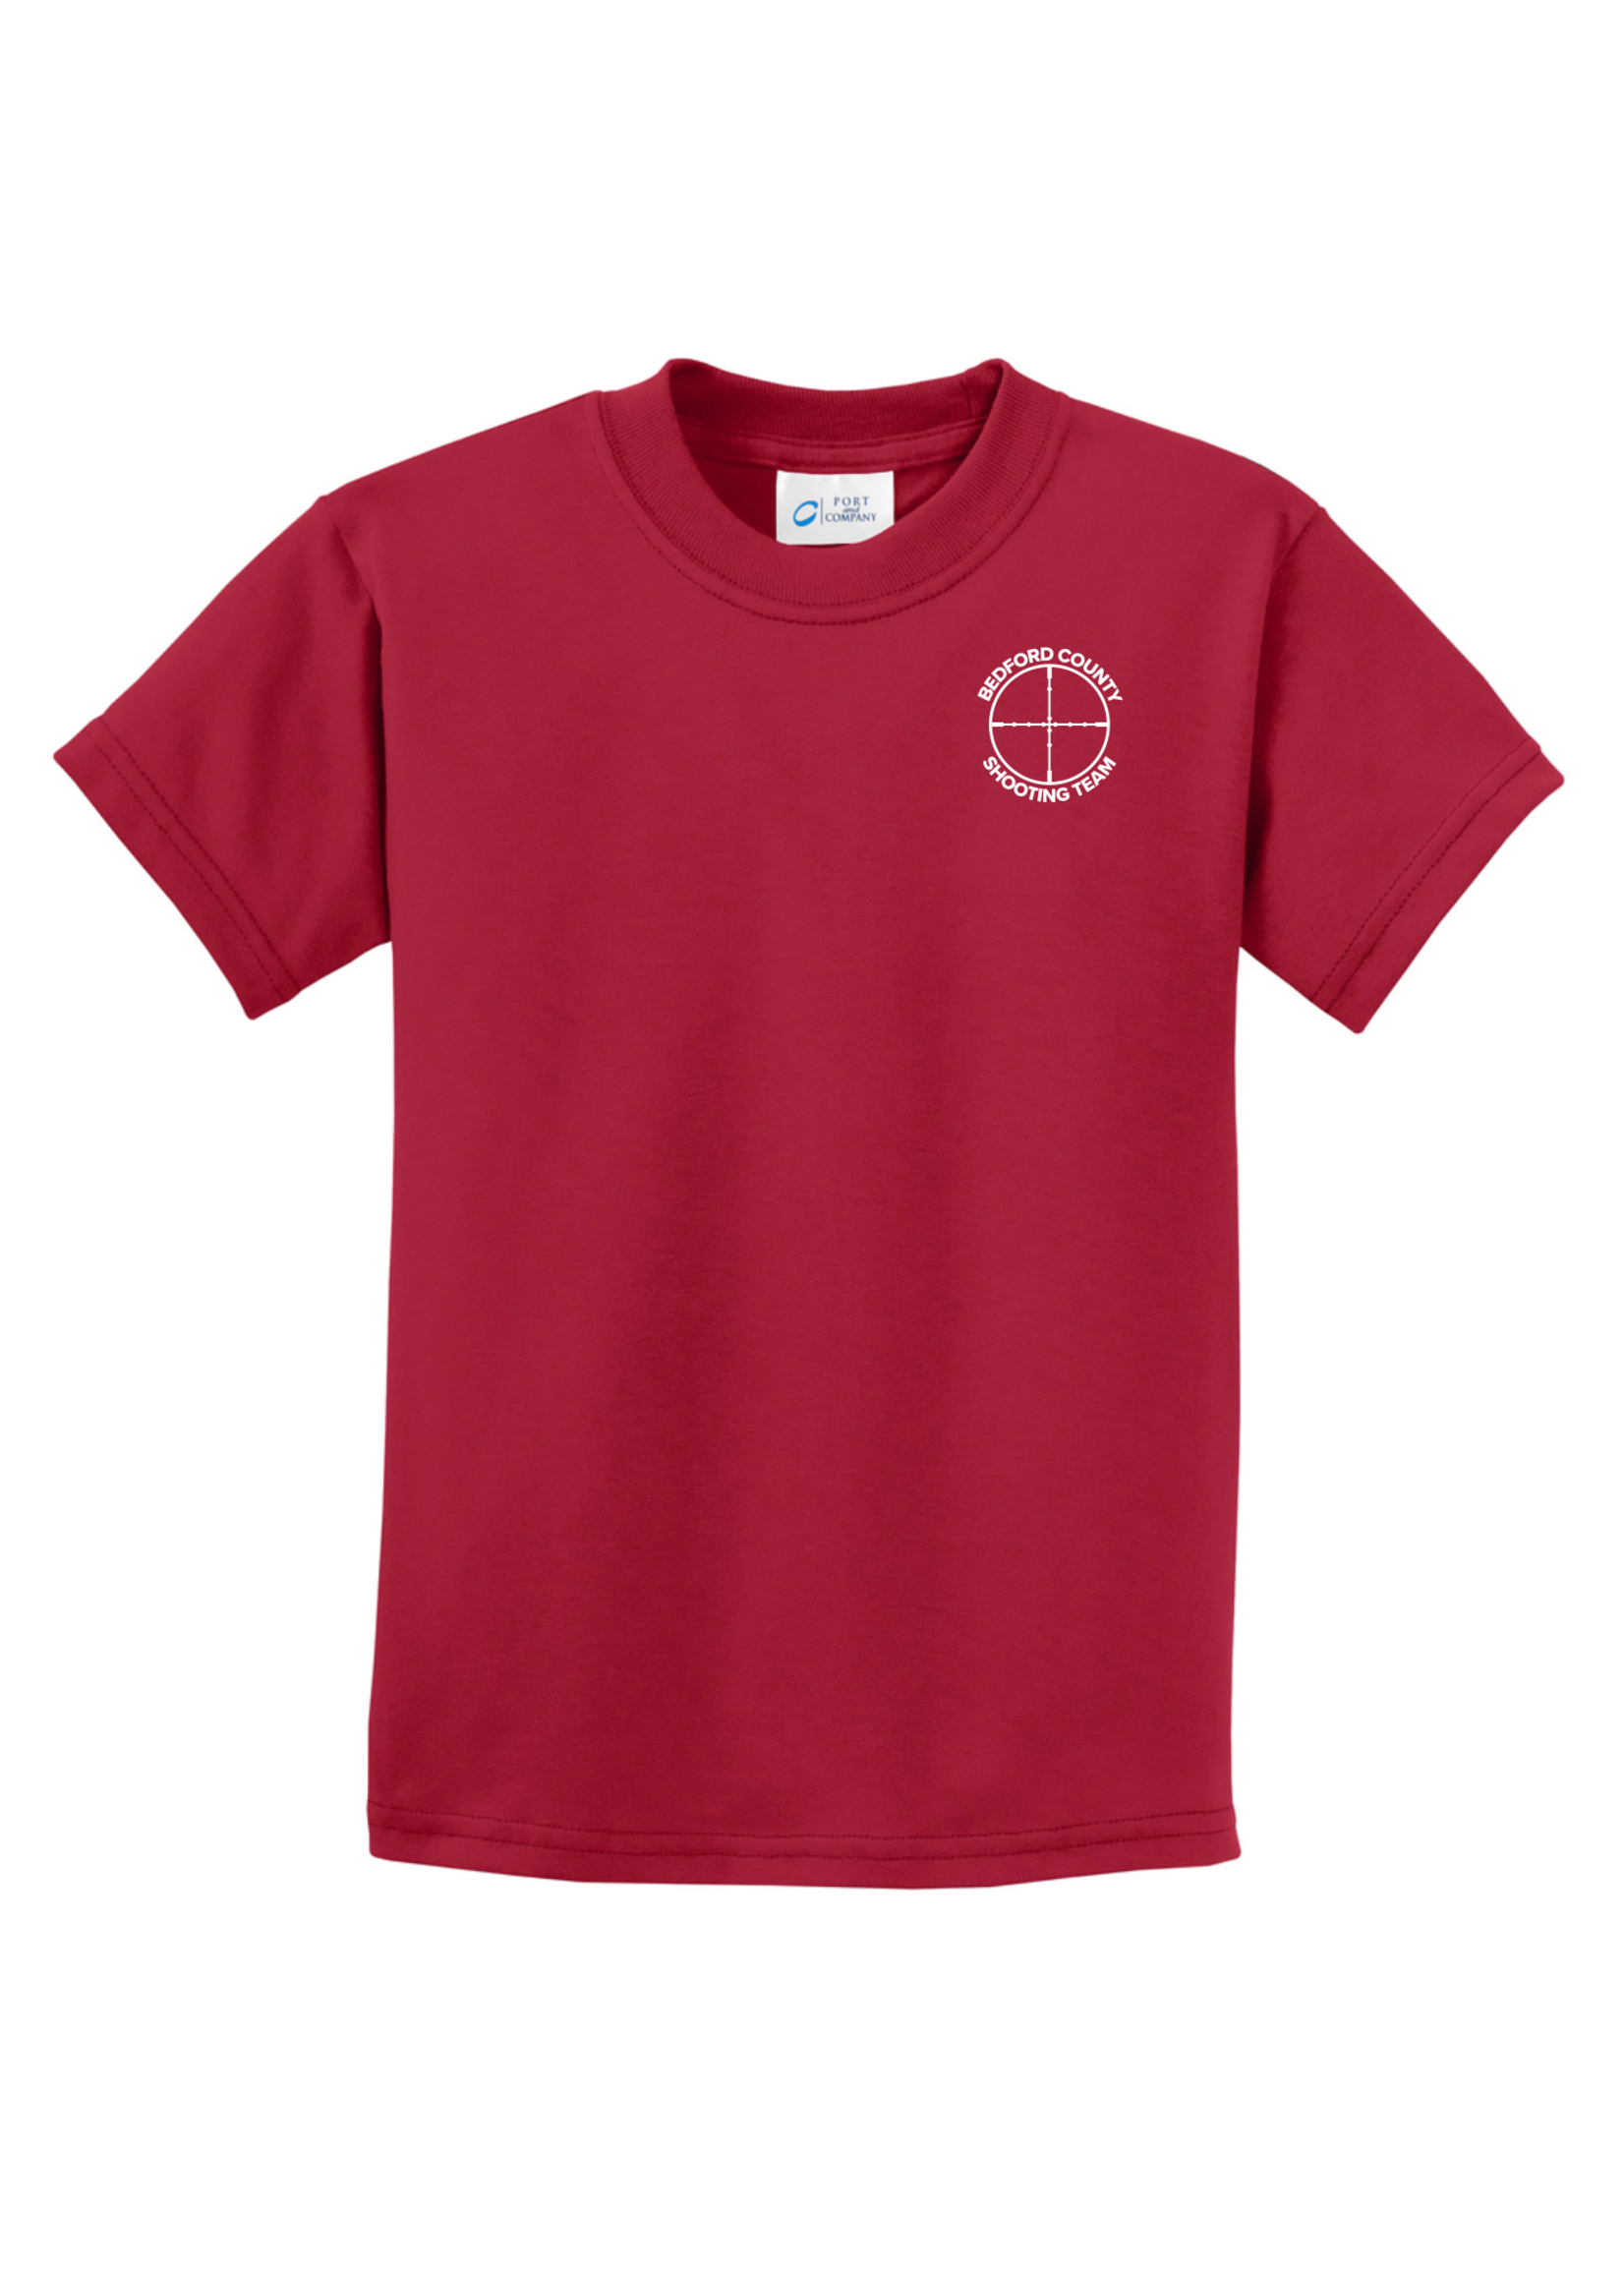 Bedford County Shooting Club  Cotton Tee